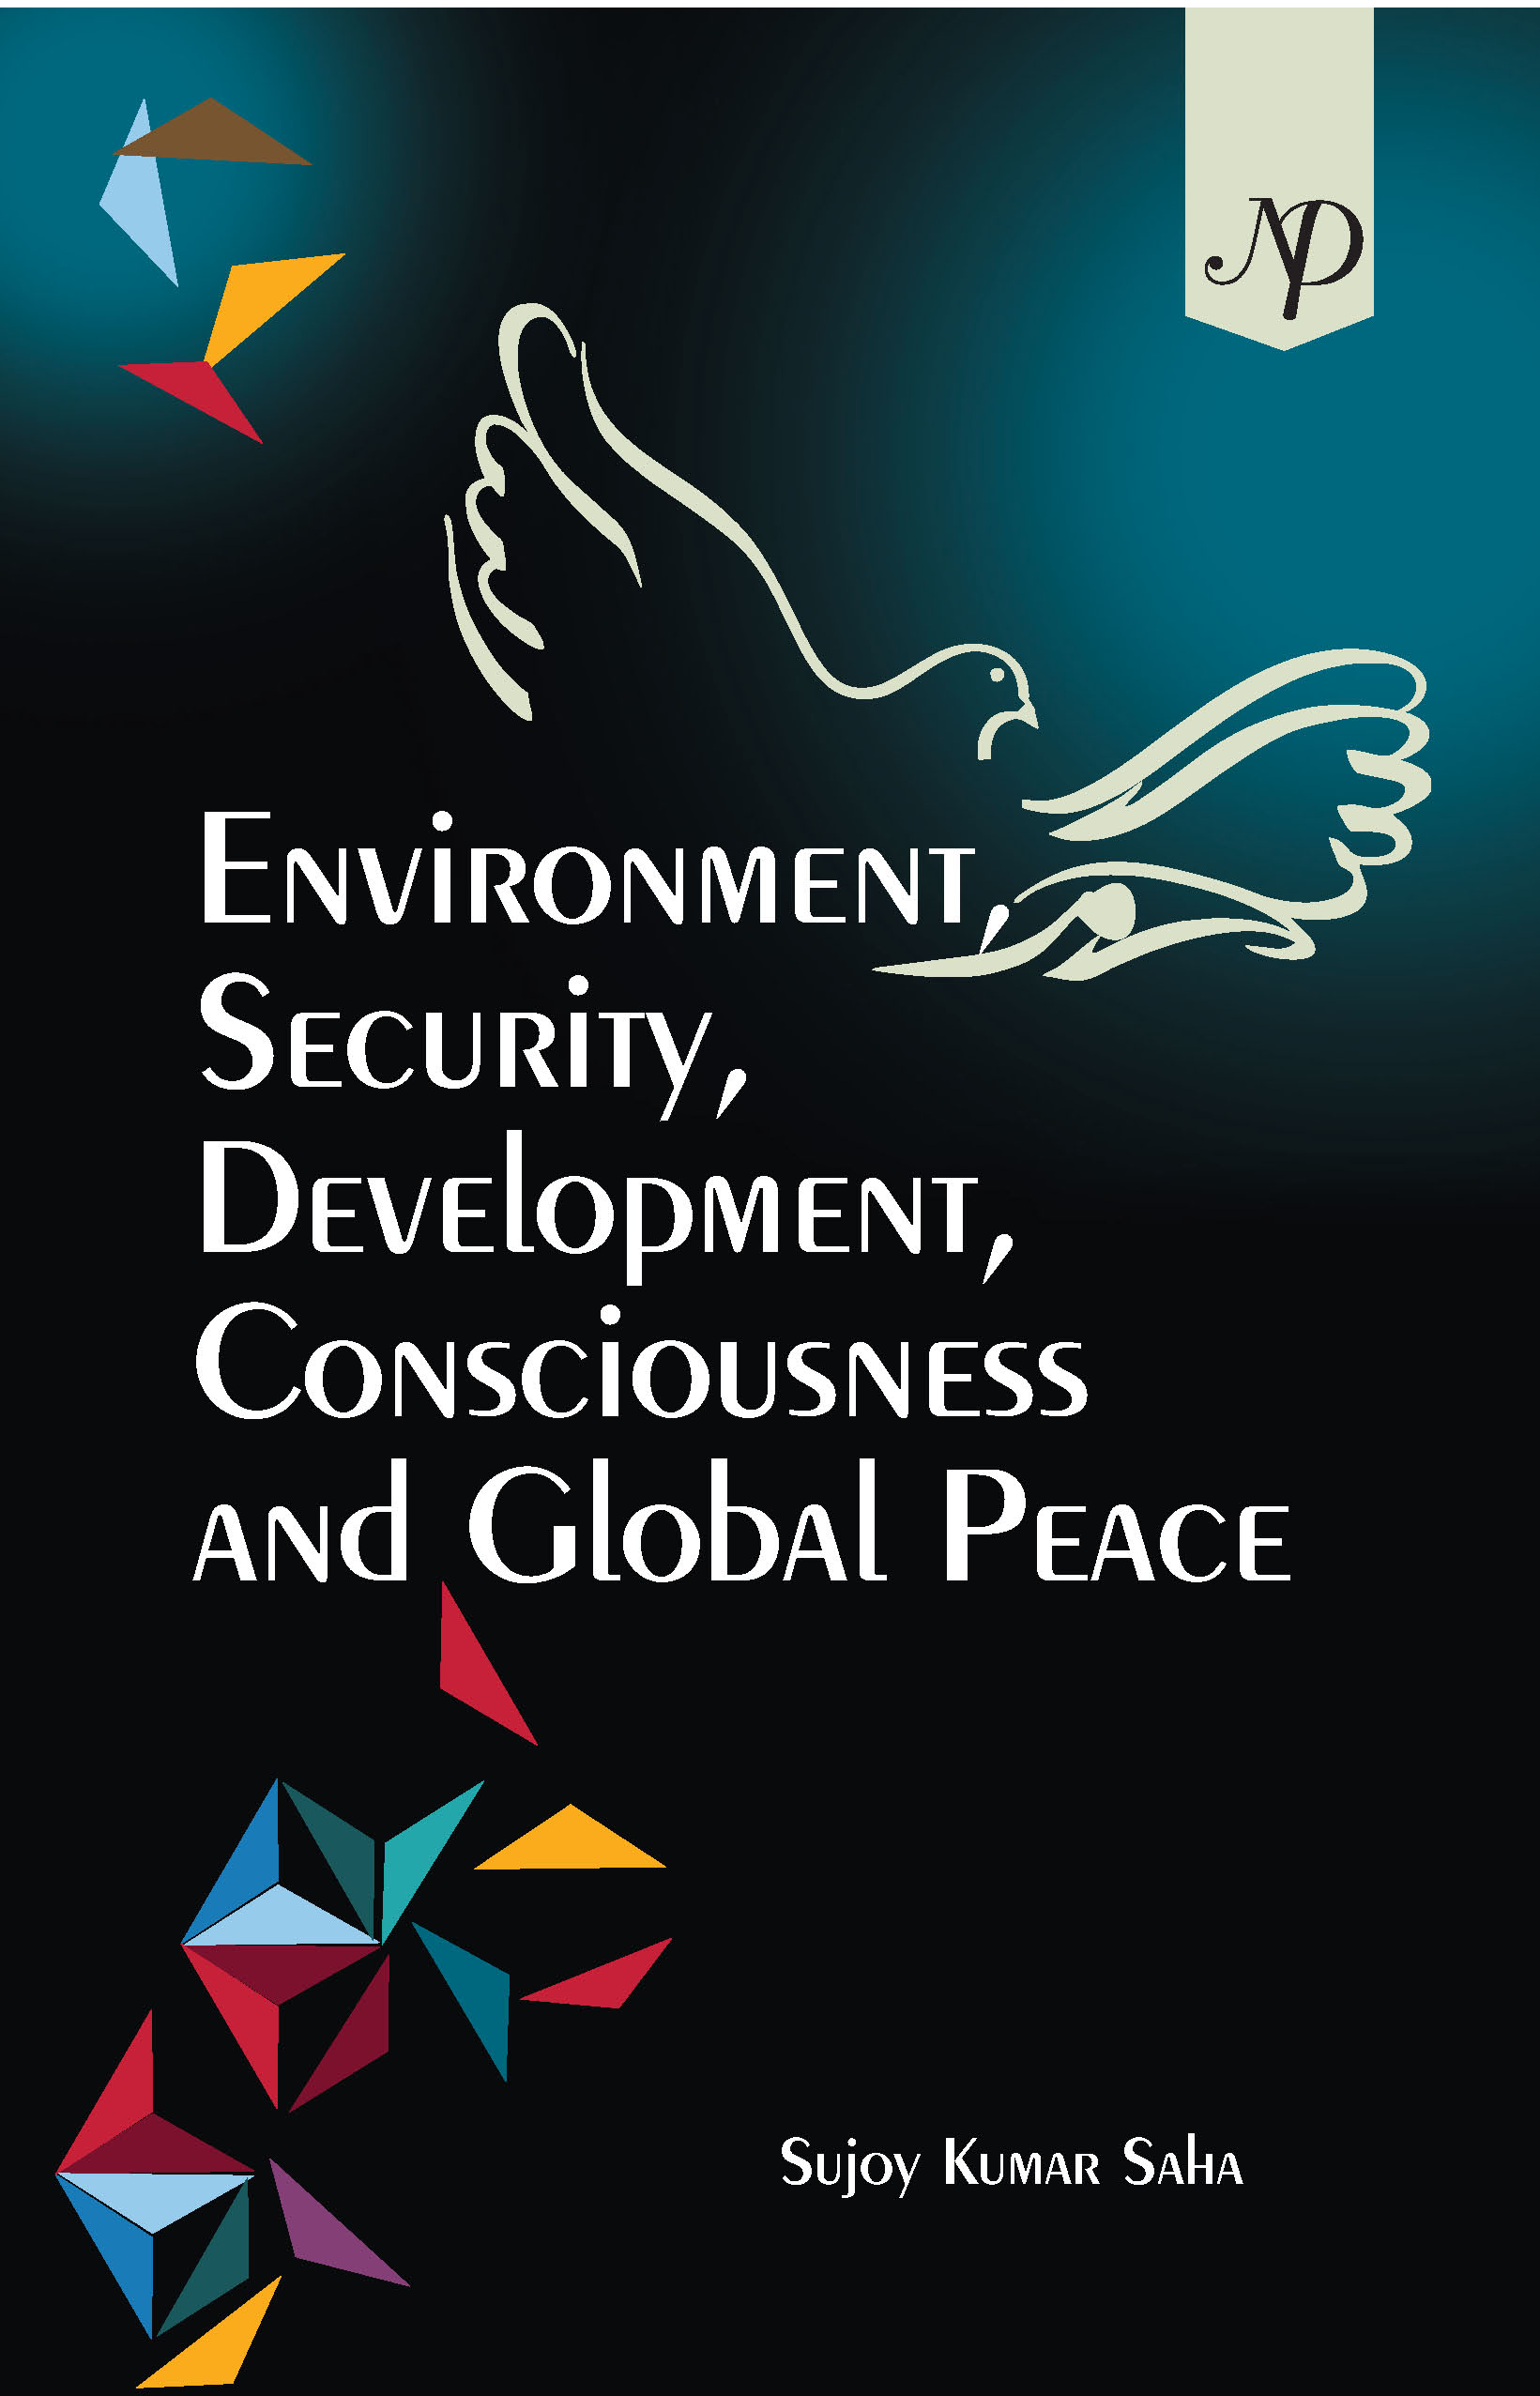 Environment, Security, Development, Consciousness and Global Peace Cover.jpg